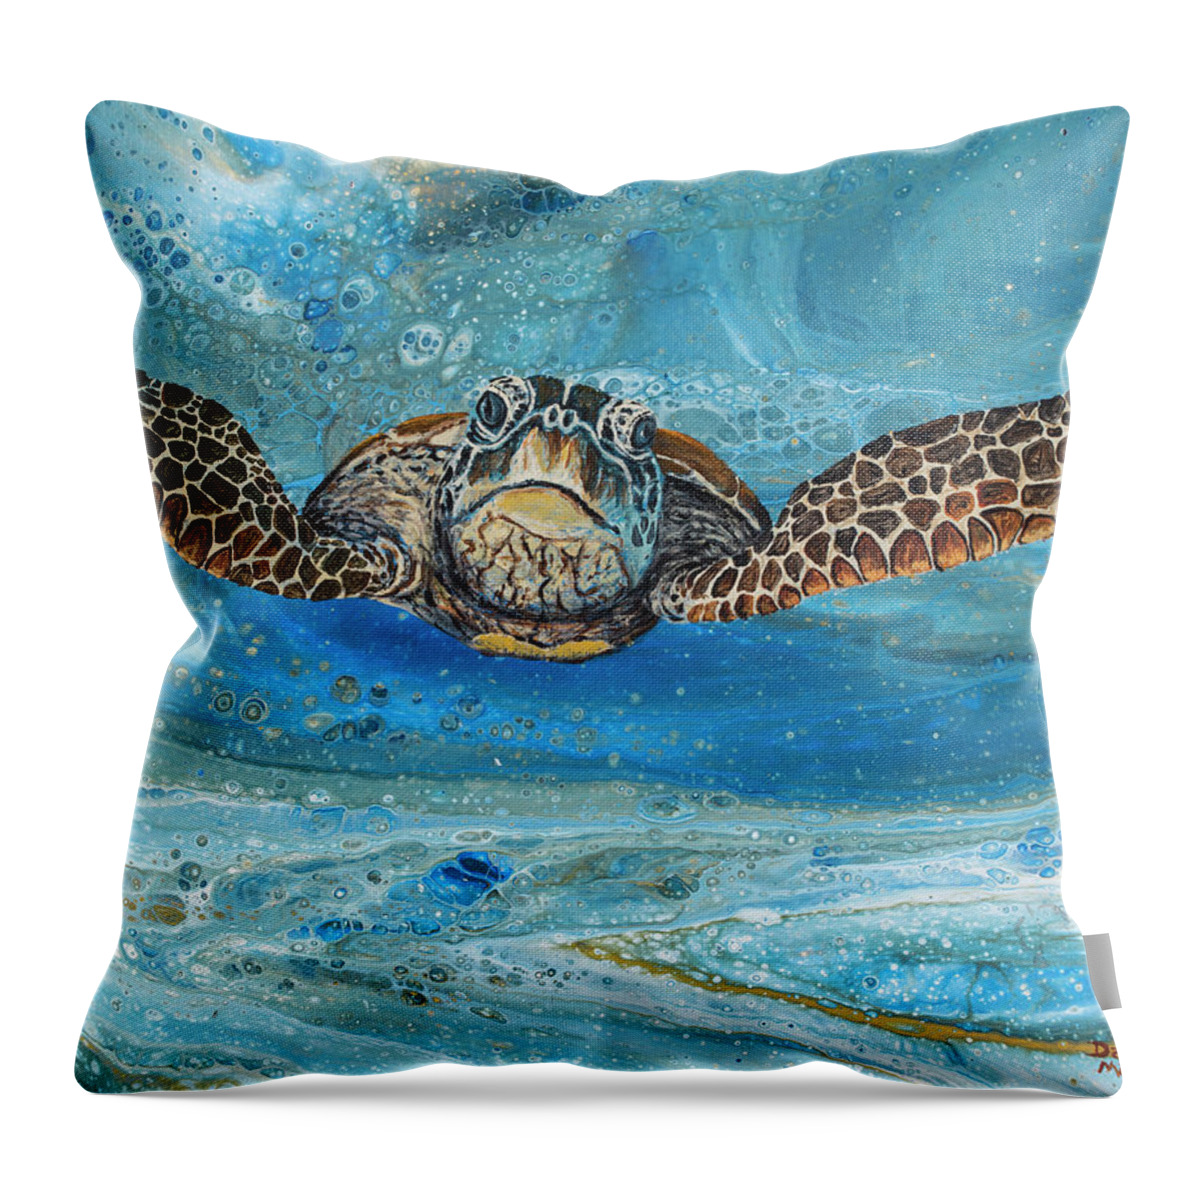 Honu Throw Pillow featuring the painting Crush The Honu by Darice Machel McGuire